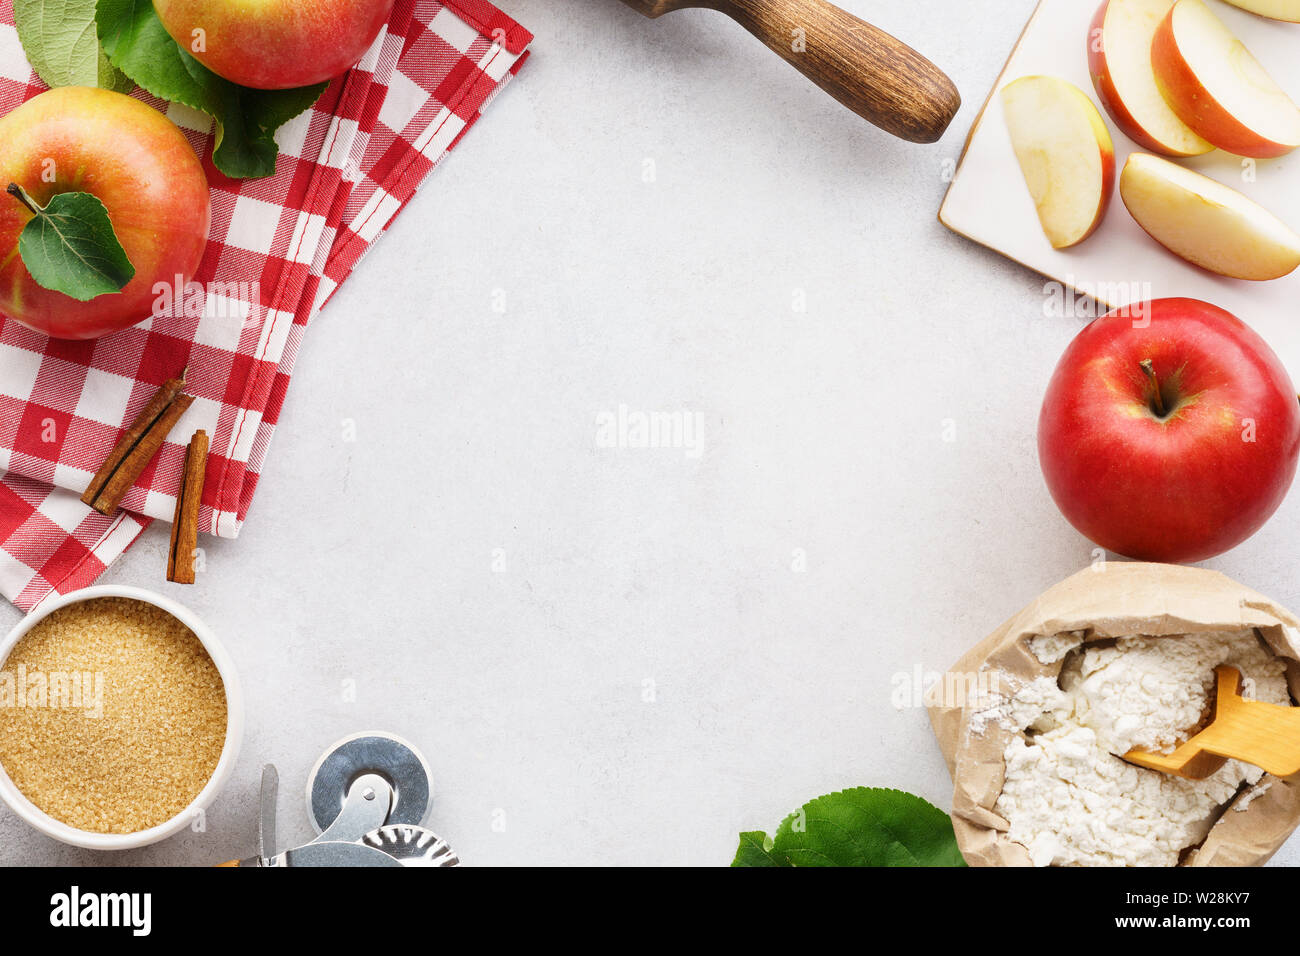 Ingredients and tools for making an apple pie. Seasonal sweet pastry frame background with copy space. Stock Photo